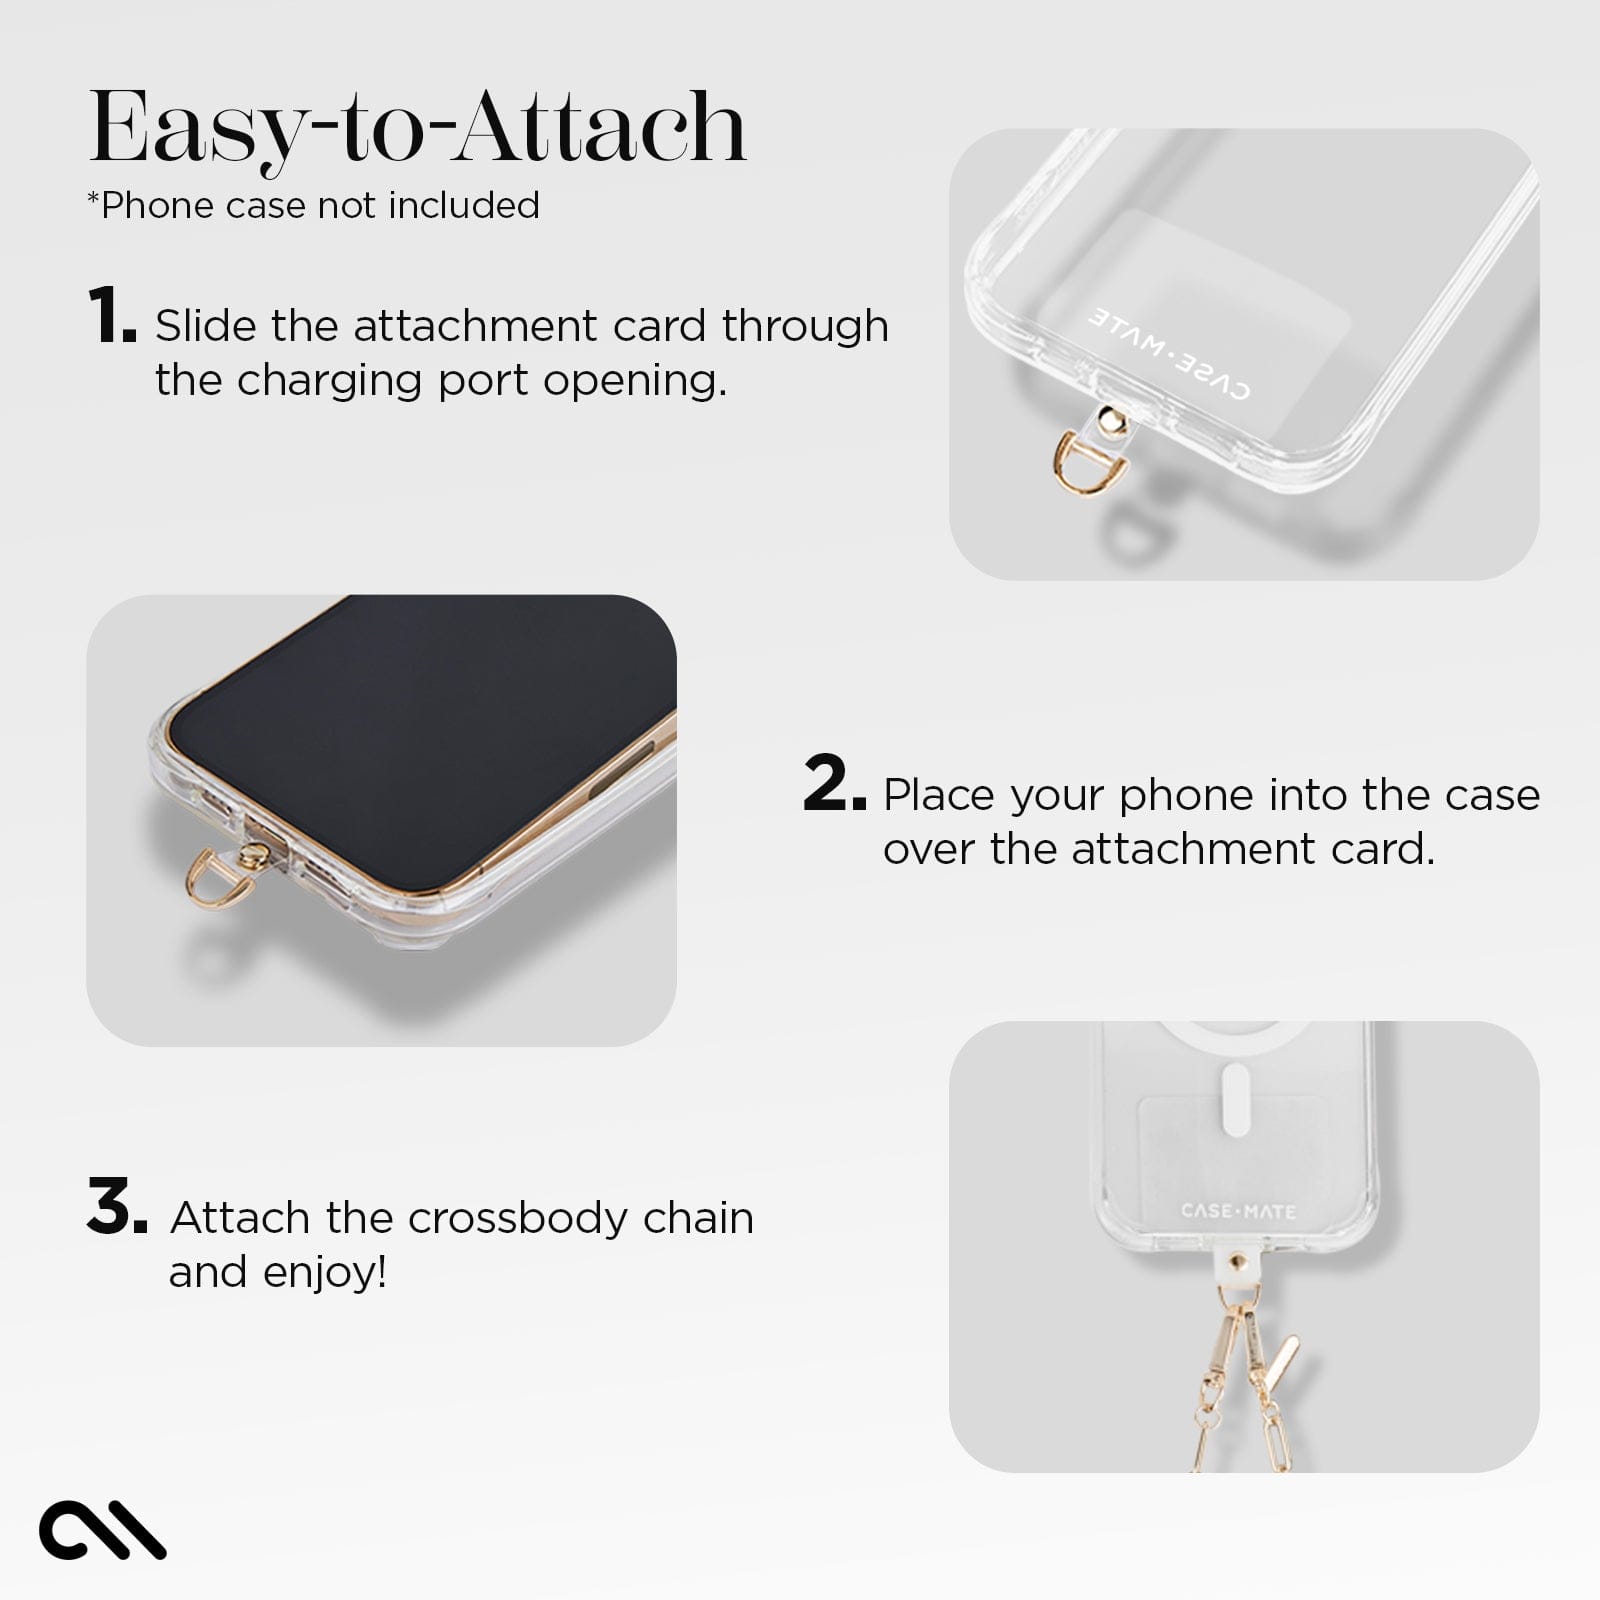 EASY TO ATTACH. 1. SLIDE THE ATTACHMENT CARD THROUGH THE CHARGING PORT OPENING. 2. PLACE YOUR PHONE INTO THE CASE OVER THE ATTACHMENT CARD. 3. ATTACH THE CROSSBODY CHAIN AND ENJOY!